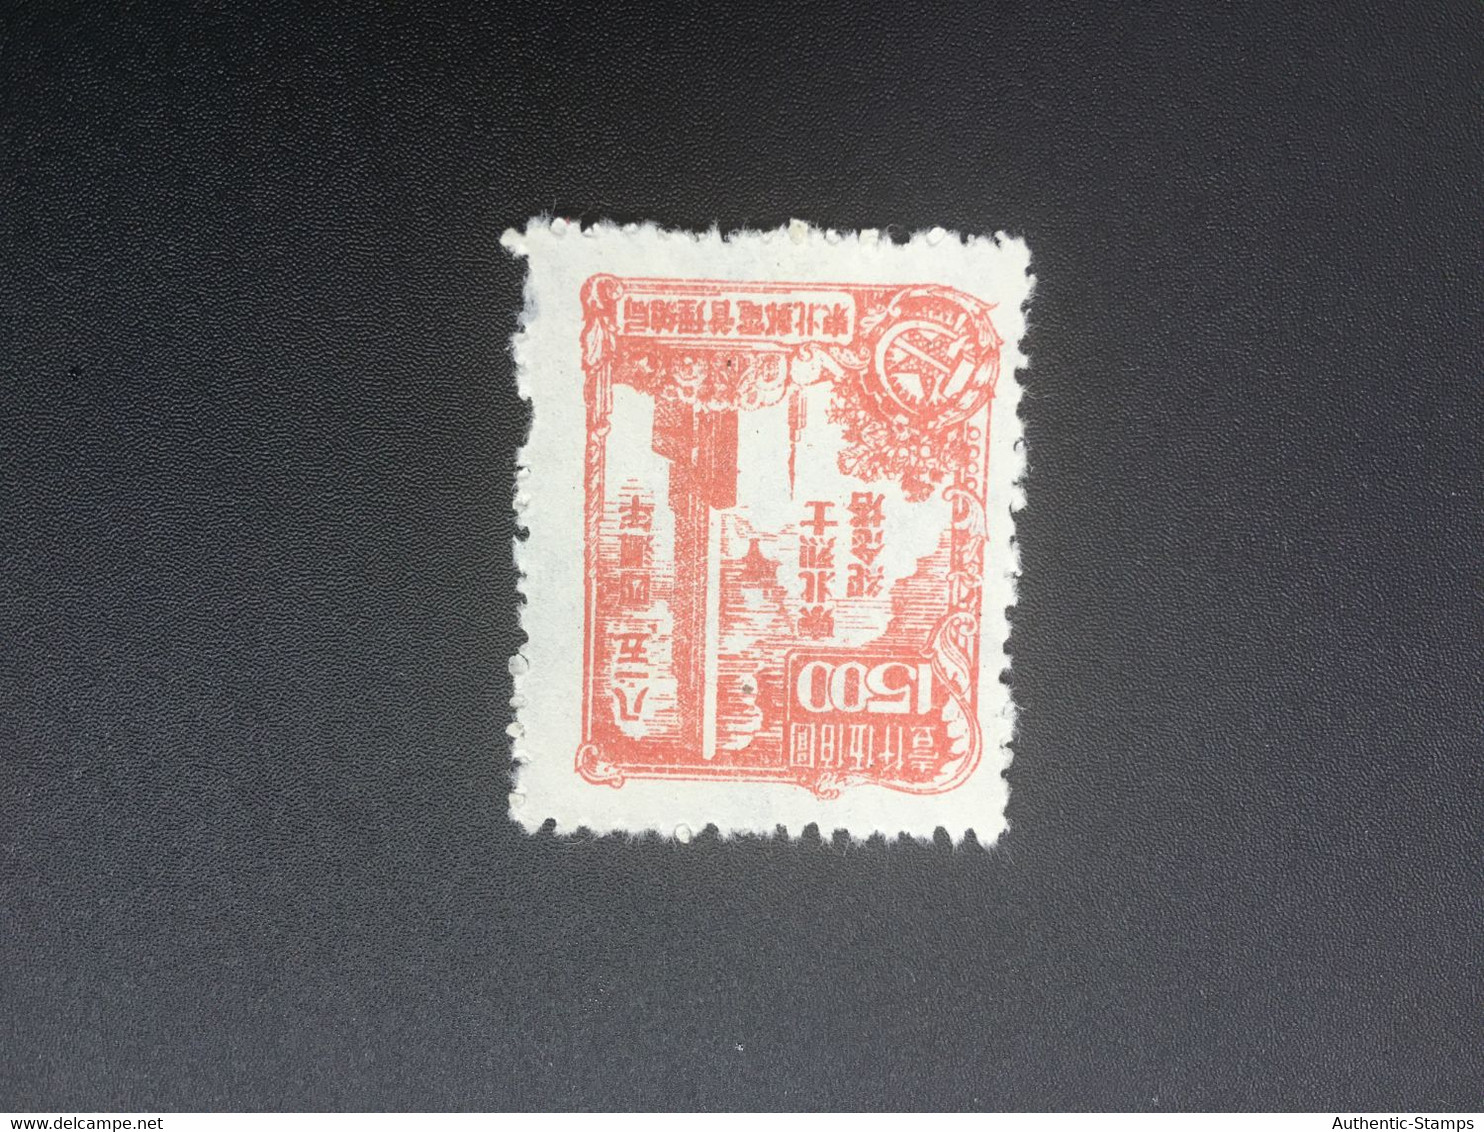 CHINA STAMP, UnUSED, TIMBRO, STEMPEL, CINA, CHINE, LIST 6163 - Chine Du Nord-Est 1946-48